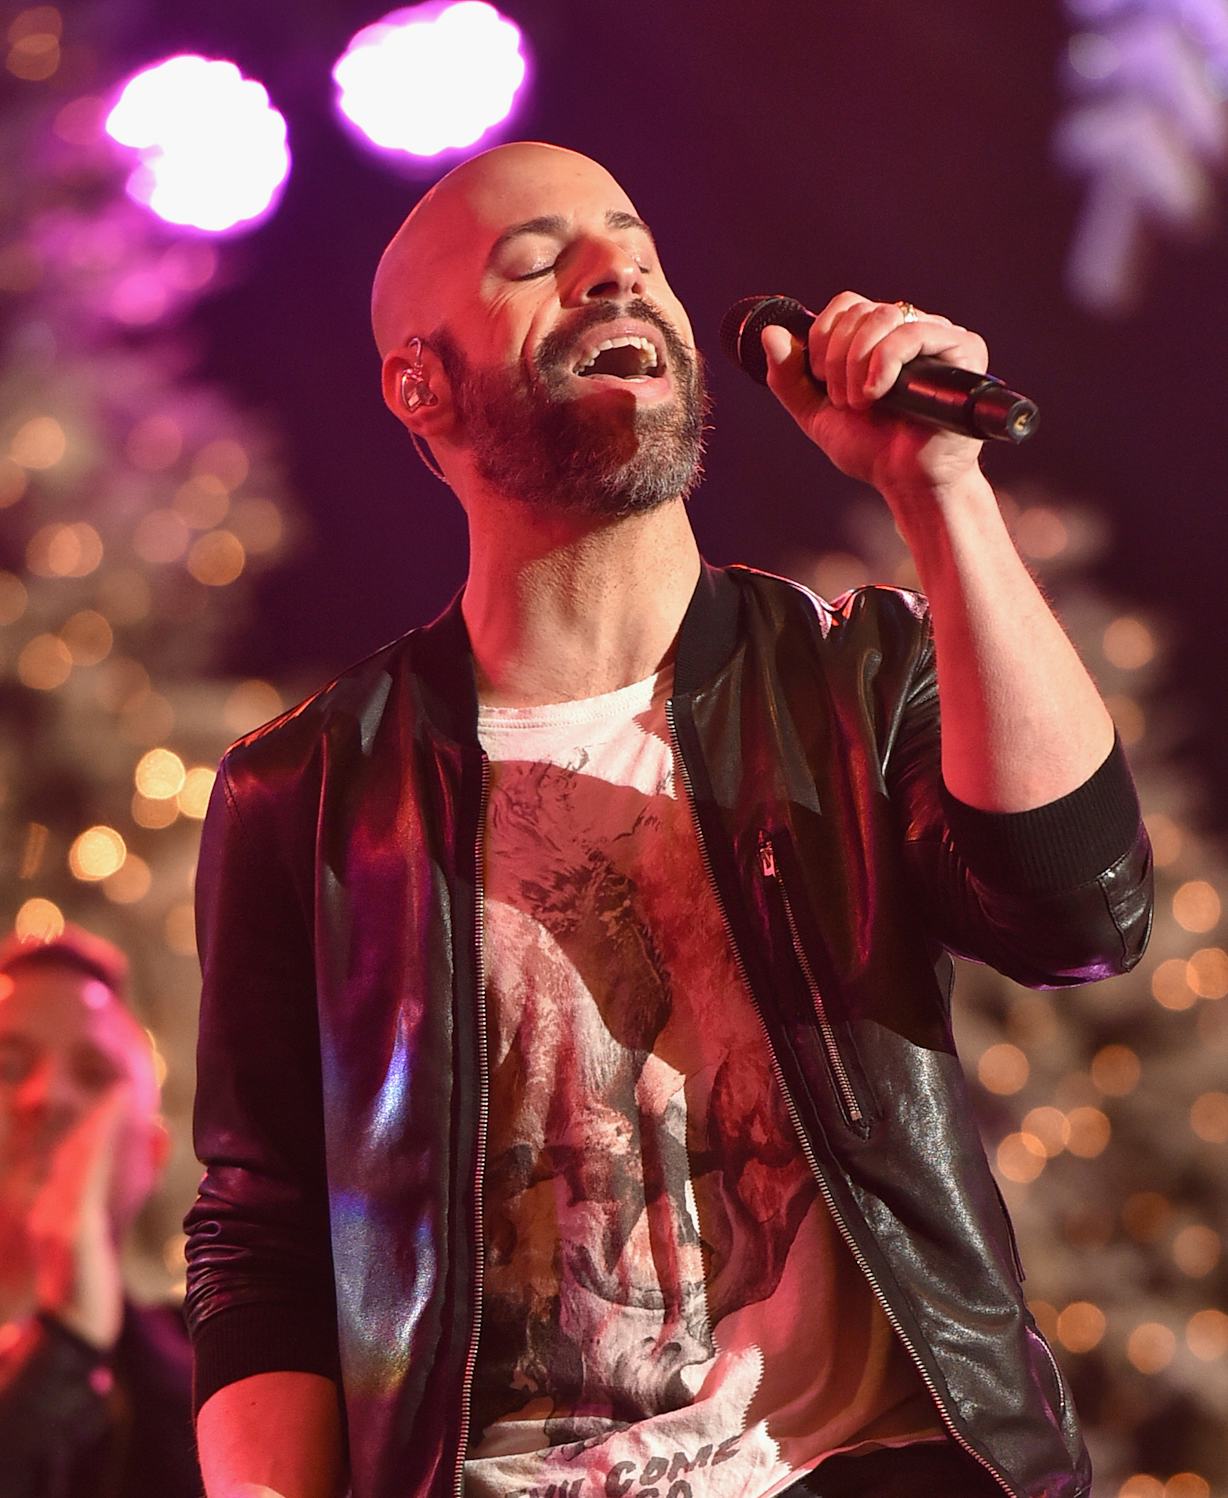 When Will Chris Daughtry Release His Next Album? It Might Be A While...